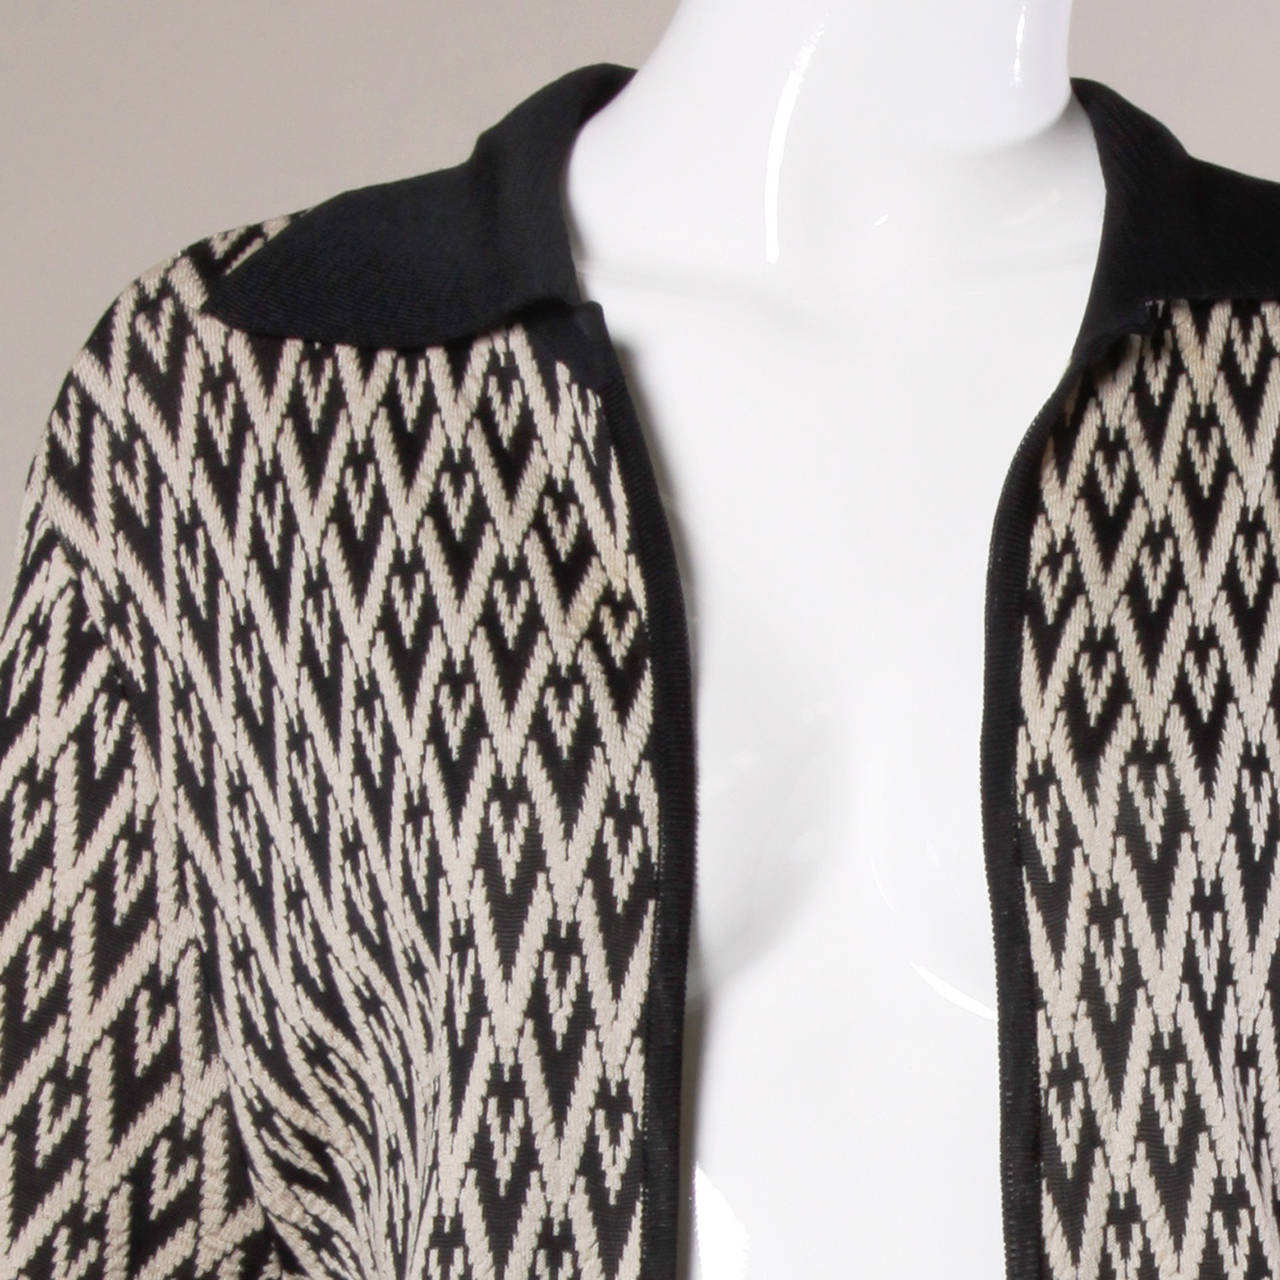 Fantastic oversized knit cardigan coat in a geometric black and tan design. Contrasting black knit collar, long sleeves and open front. Oversized fit will fit a S-L. 

Details:

Unlined
No Closure
Estimated Size: S-L
Color: Black/